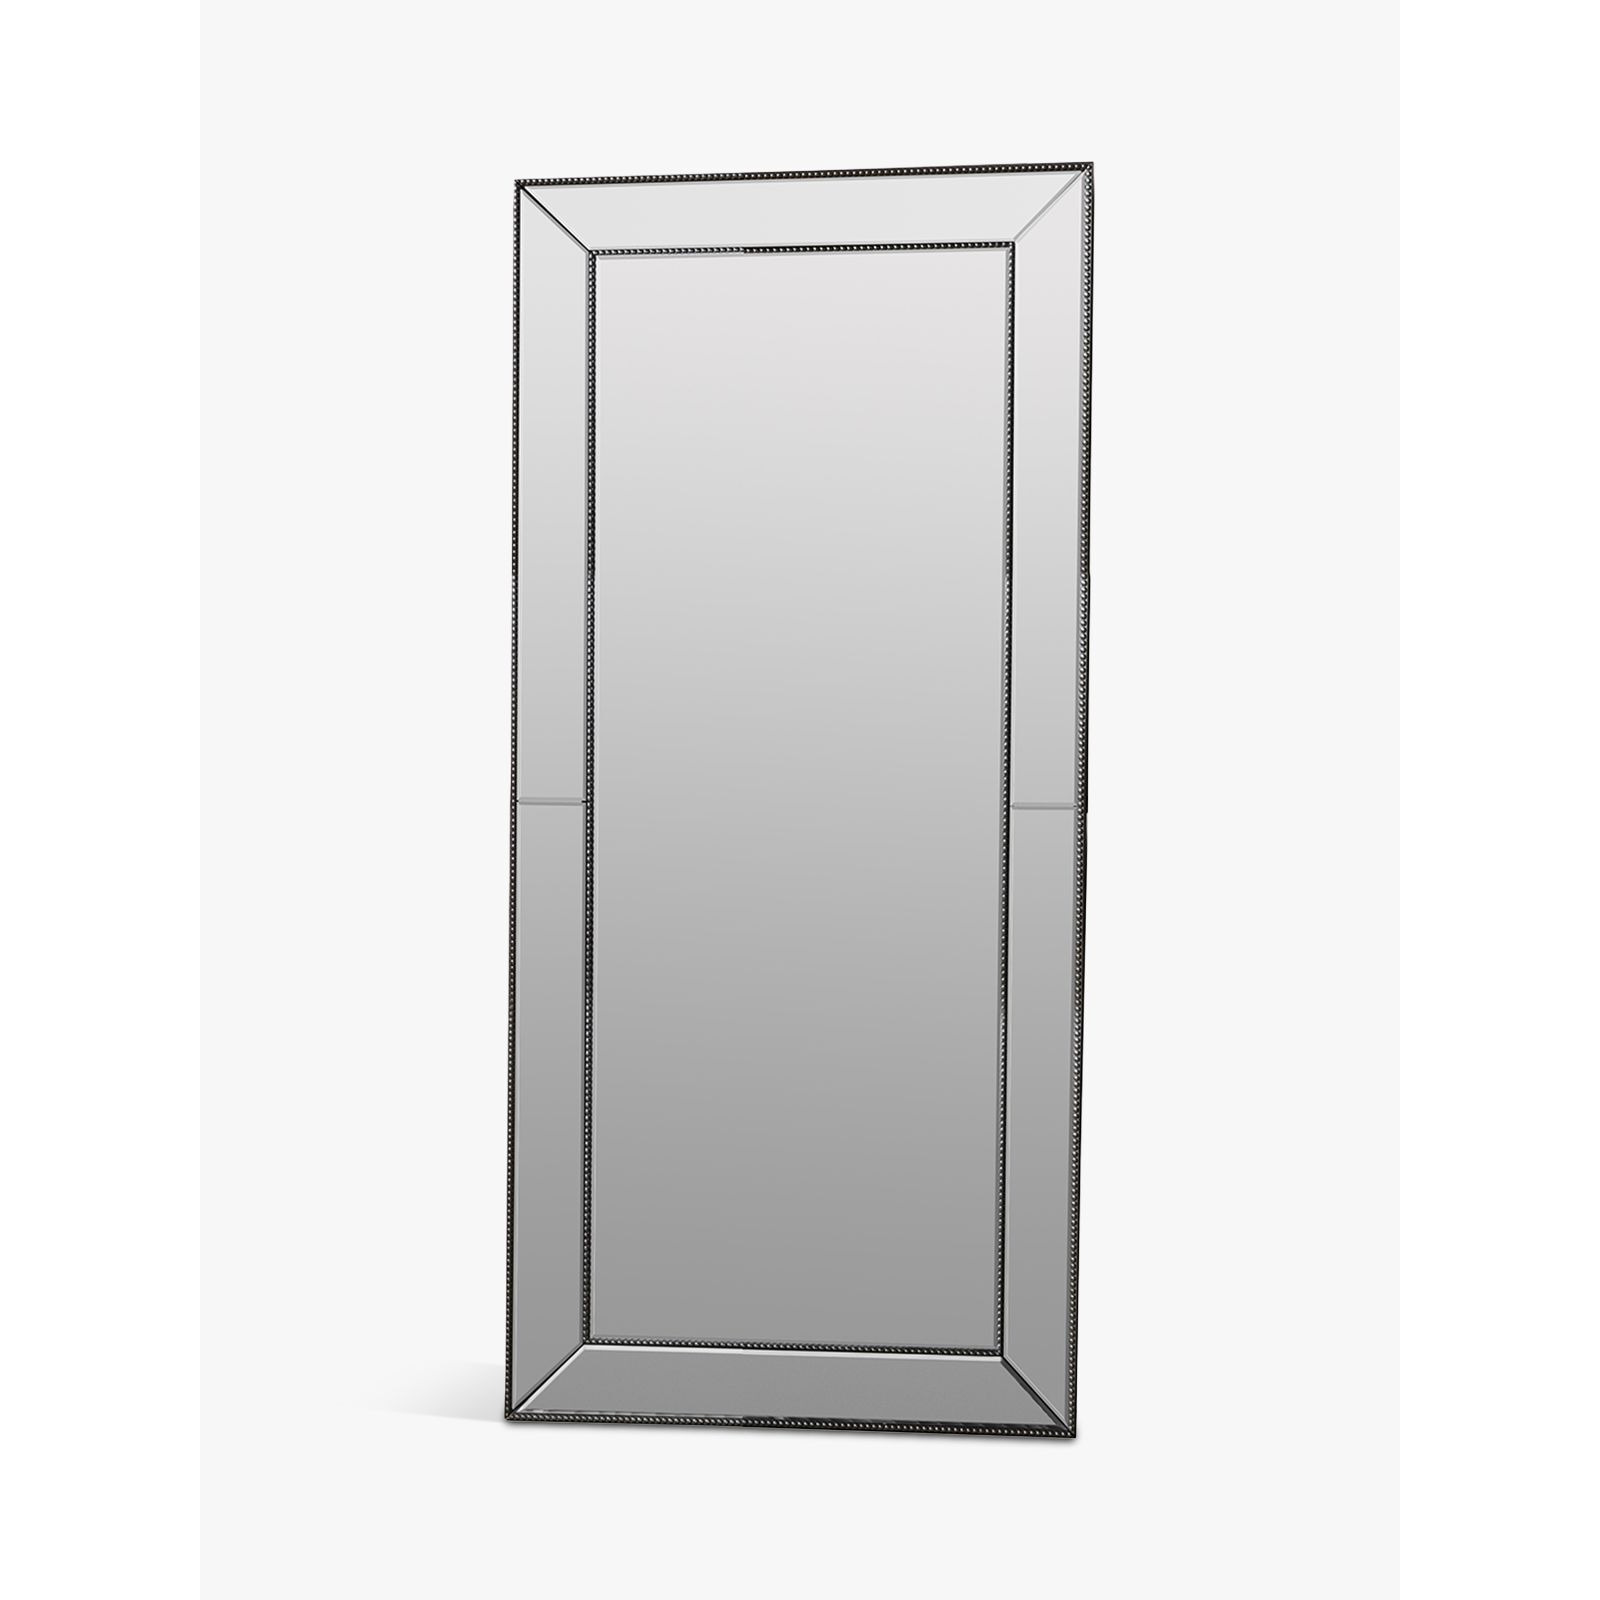 Gallery Direct Radley Rectangular Frame Leaner / Wall Mirror, 165 x 79cm, Clear - image 1